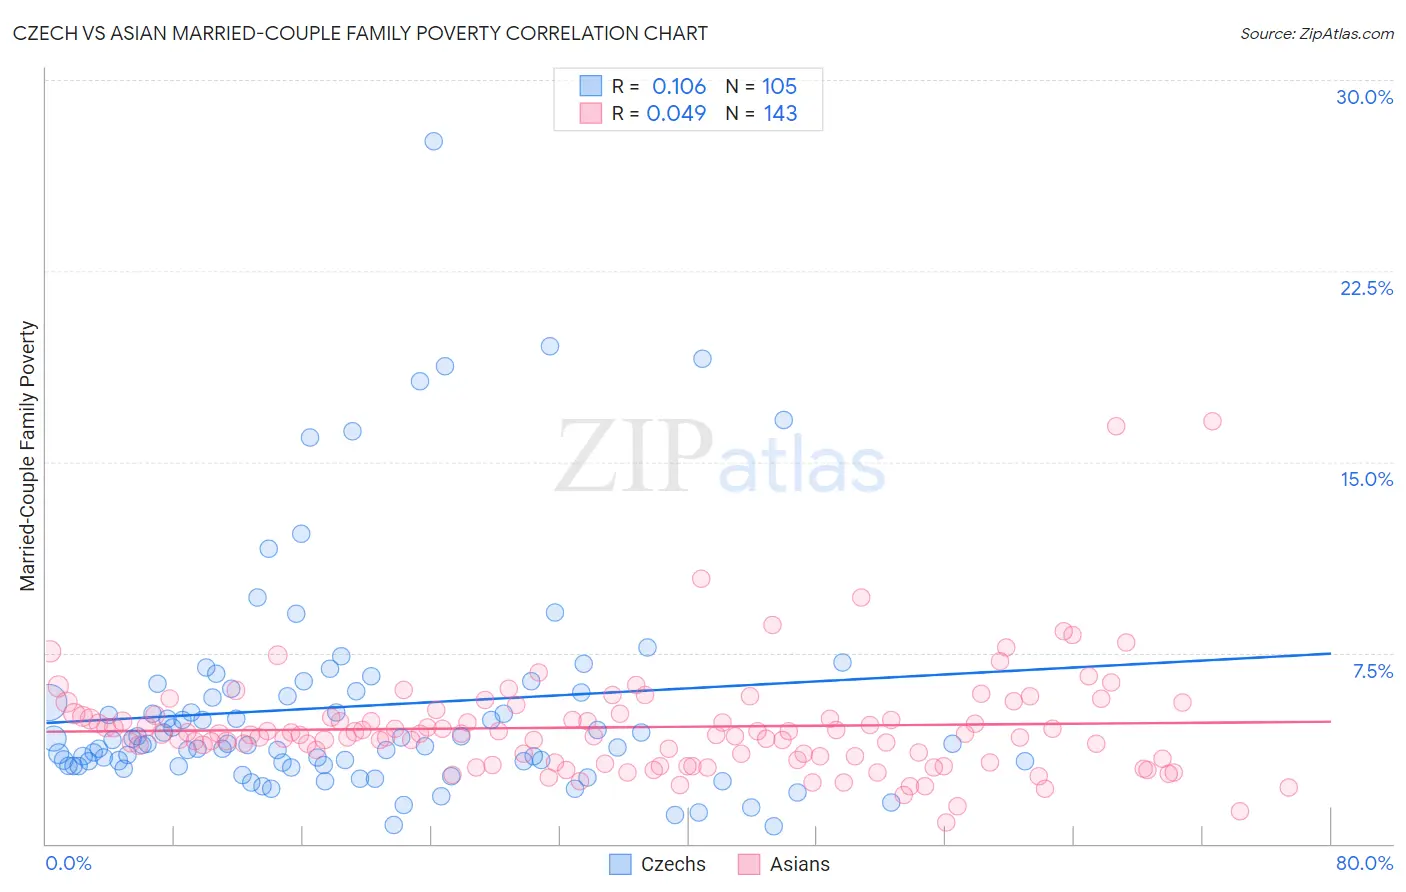 Czech vs Asian Married-Couple Family Poverty